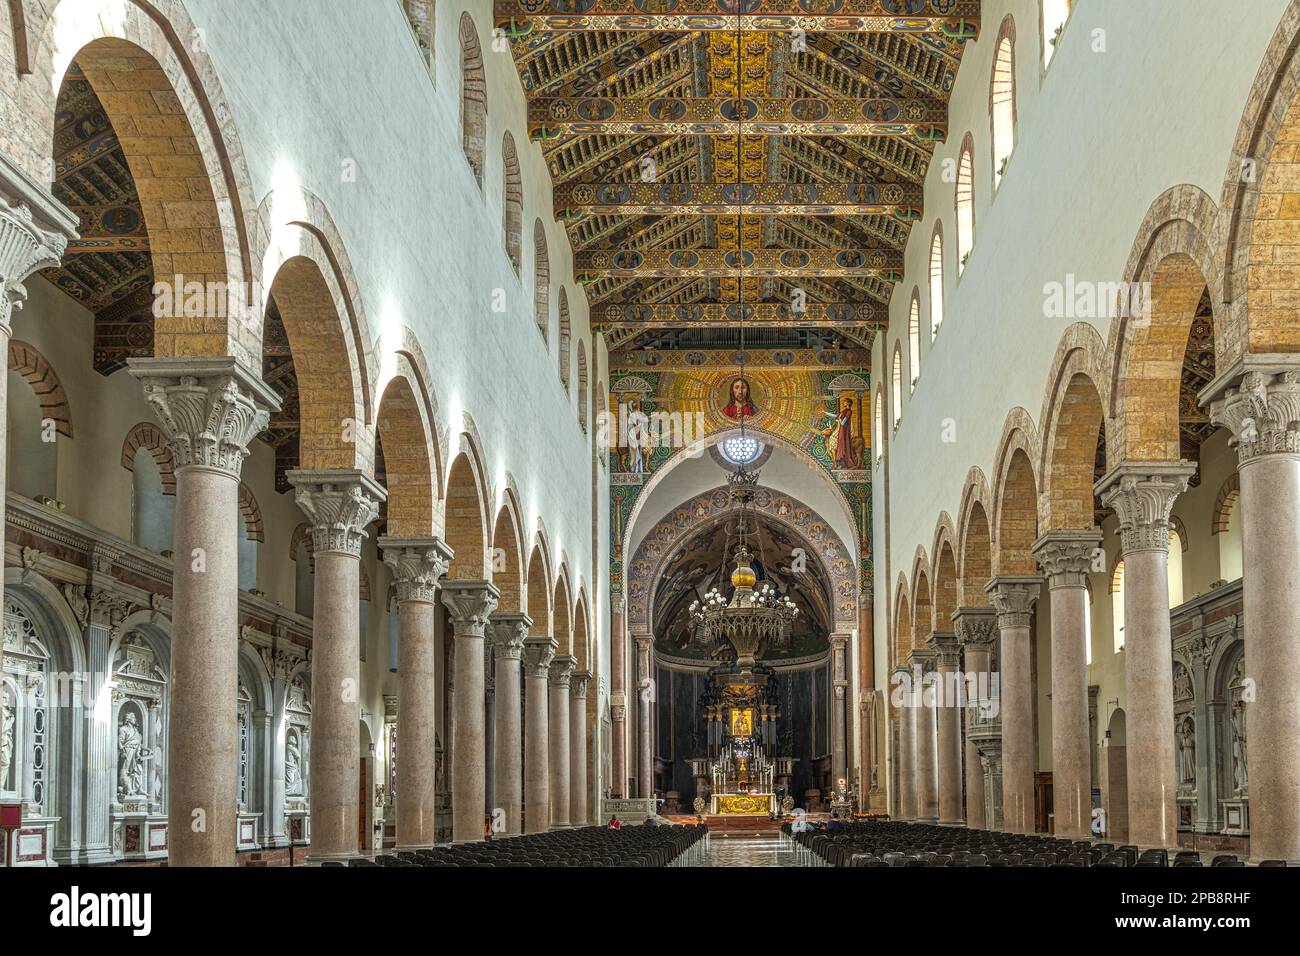 Central nave of the Basilica of Santa Maria Assunta with the ceiling with decorated trusses and the main altar with Byzantine mosaics. Messina, Sicily Stock Photo